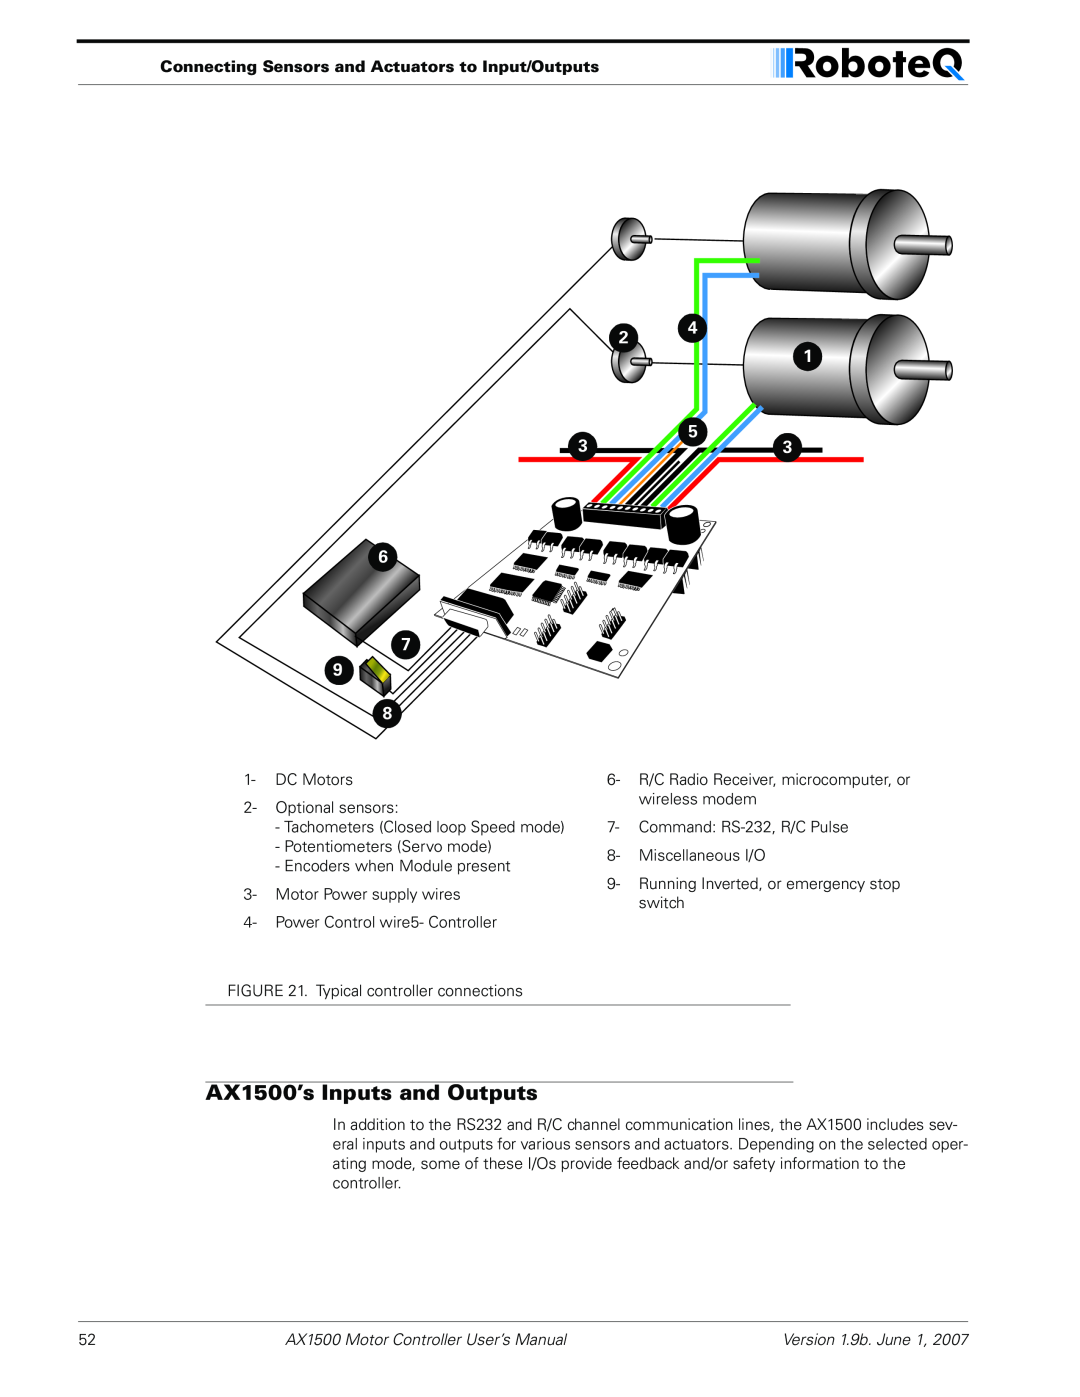 RoboteQ AX2550 user manual AX1500’s Inputs and Outputs, Connecting Sensors and Actuators to Input/Outputs 